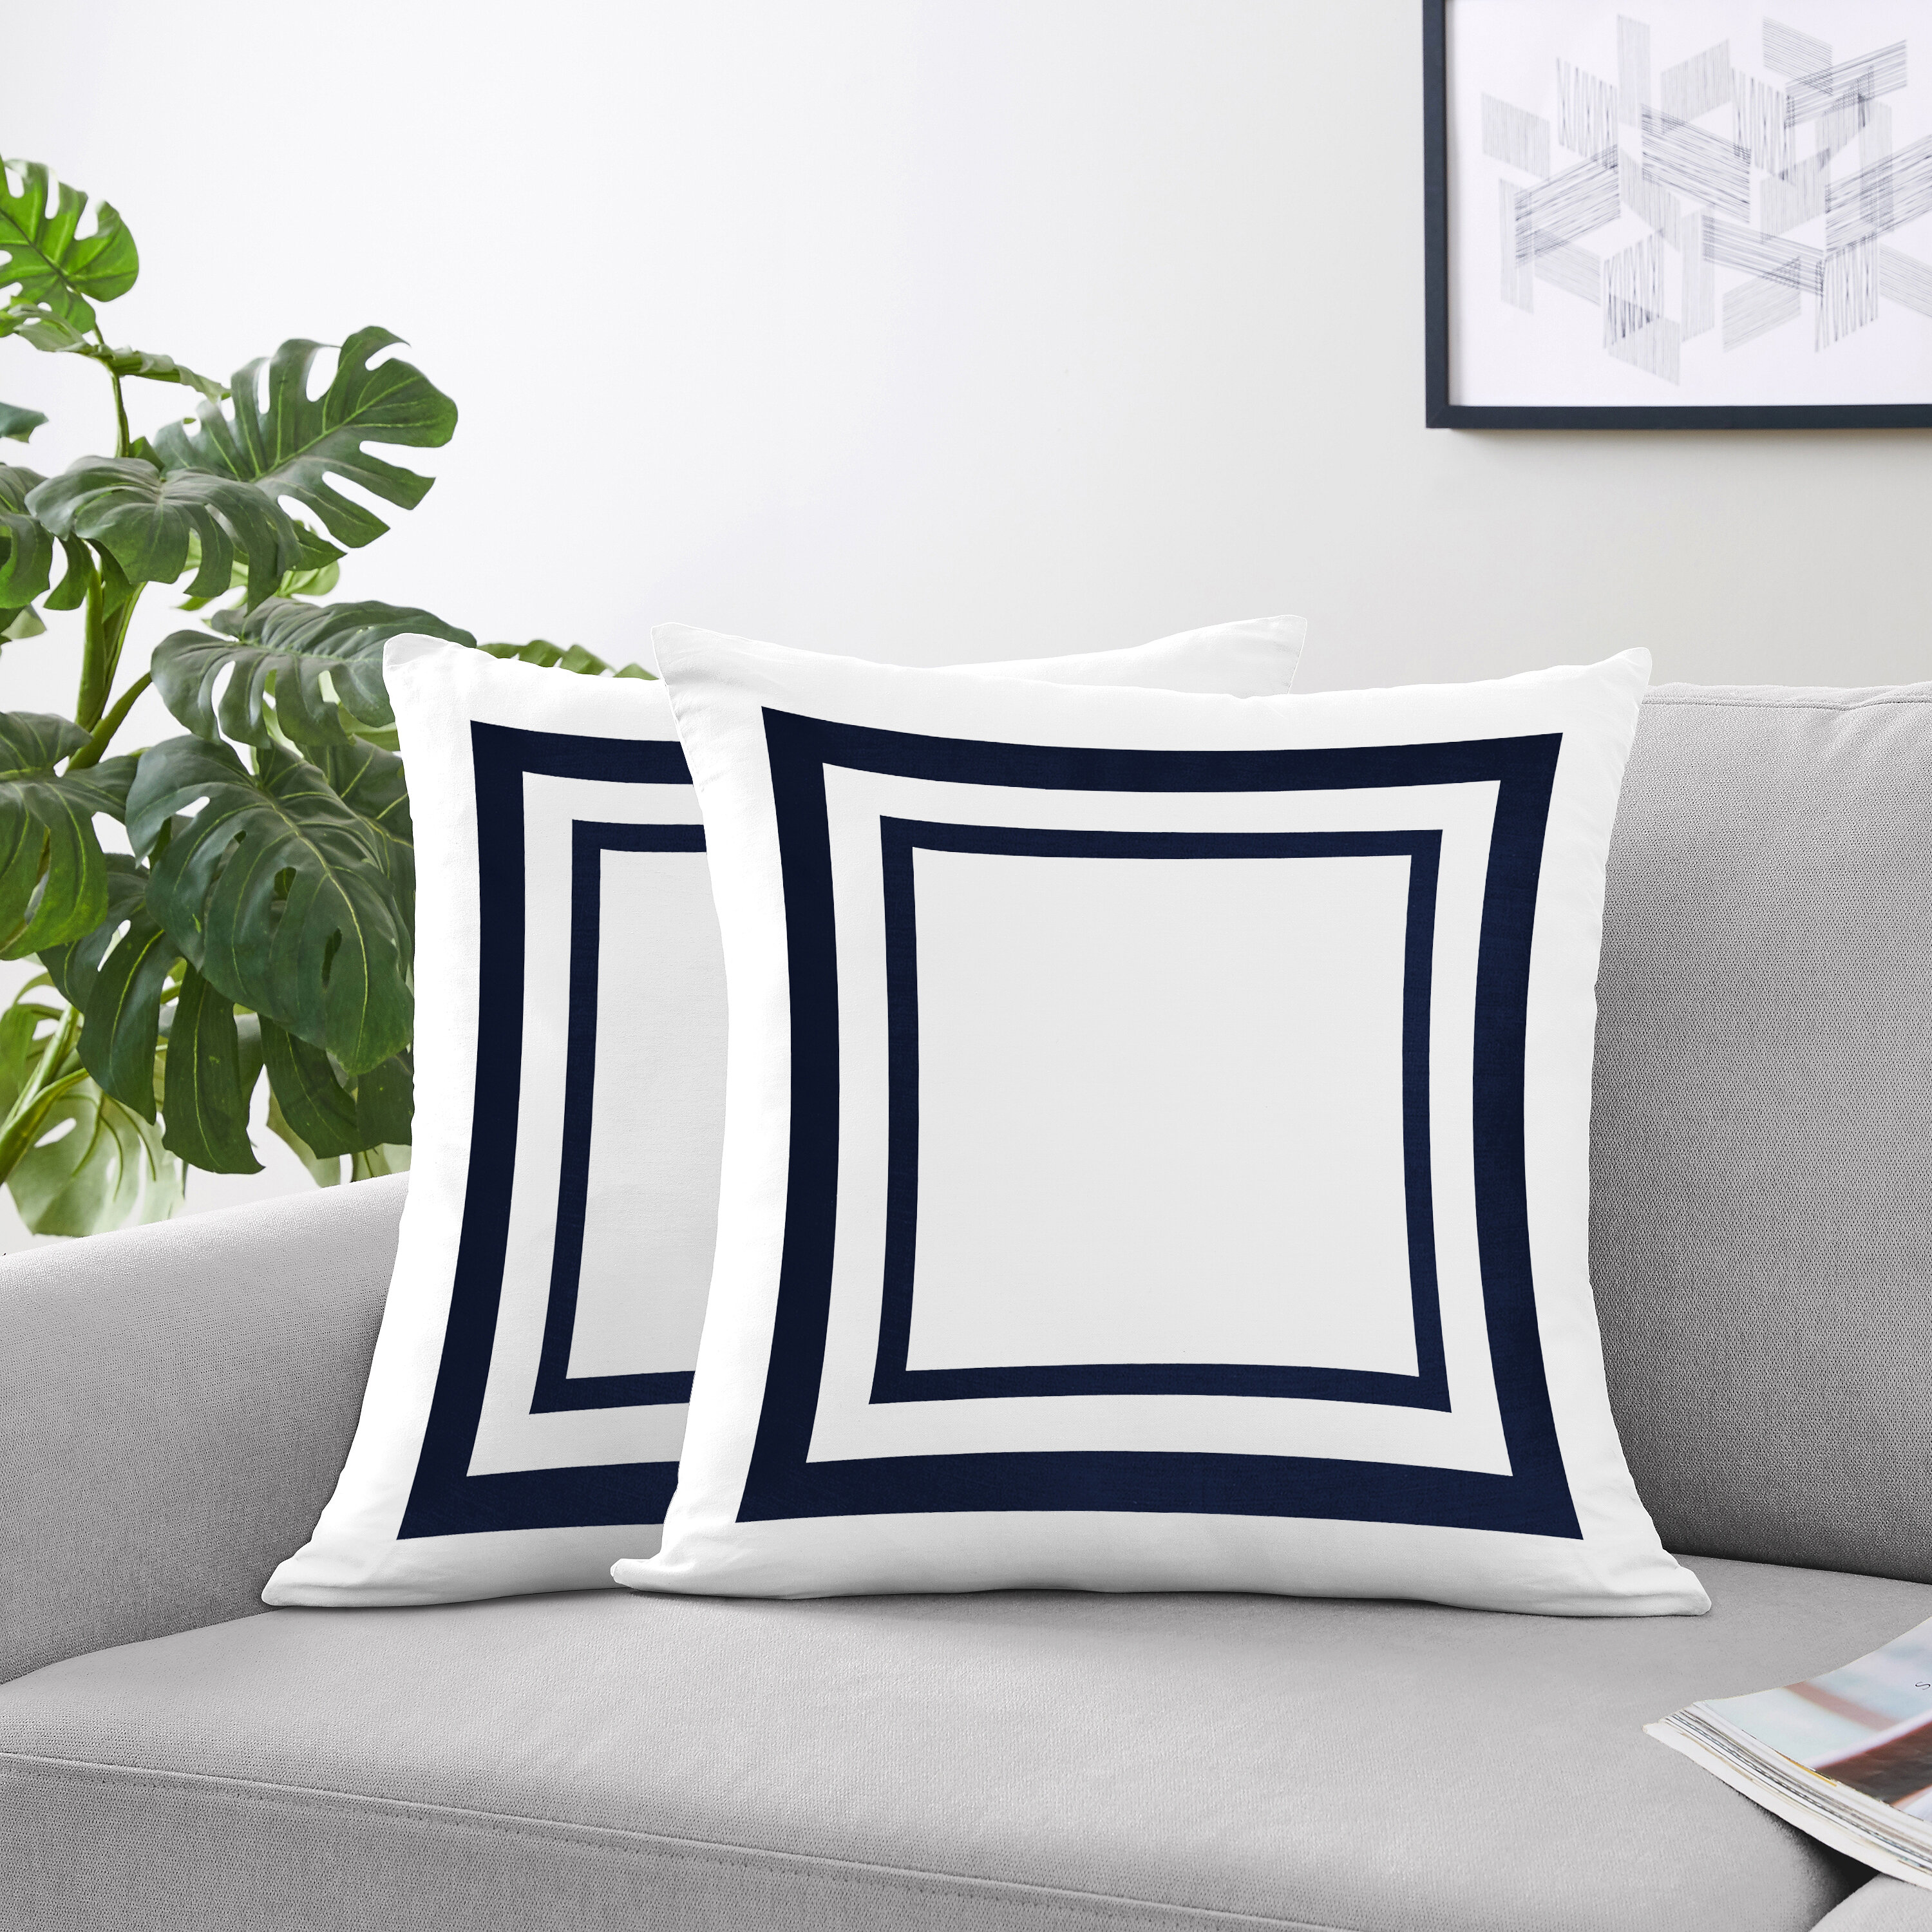 Pillow Stuffing 101: Pros & cons of the 4 most common types of filler for  decorative pillows 